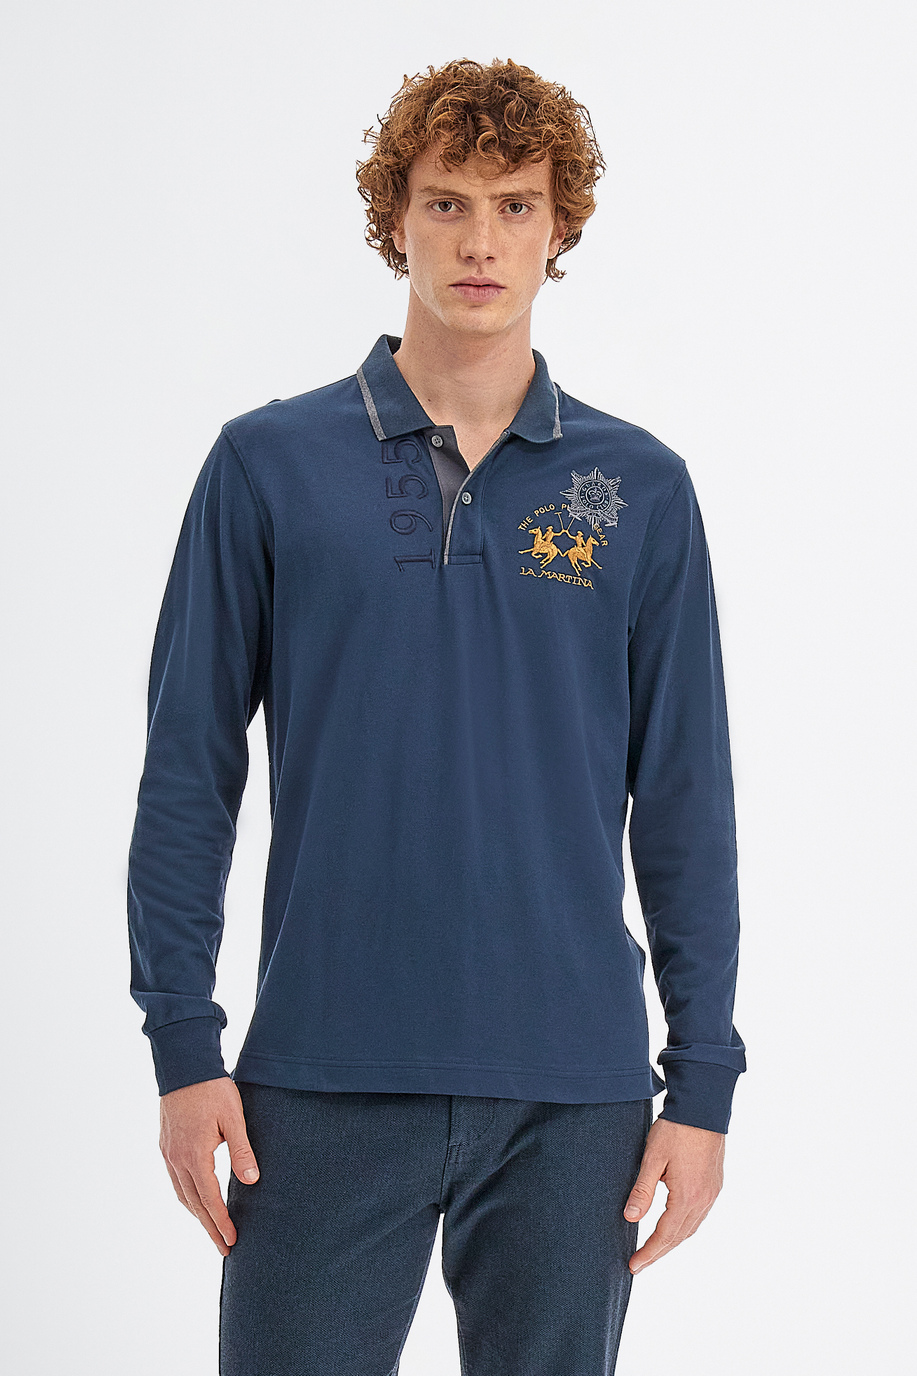 Men’s Polo Guards with long sleeves in regular fit stretch piqué cotton - Long Sleeve | La Martina - Official Online Shop